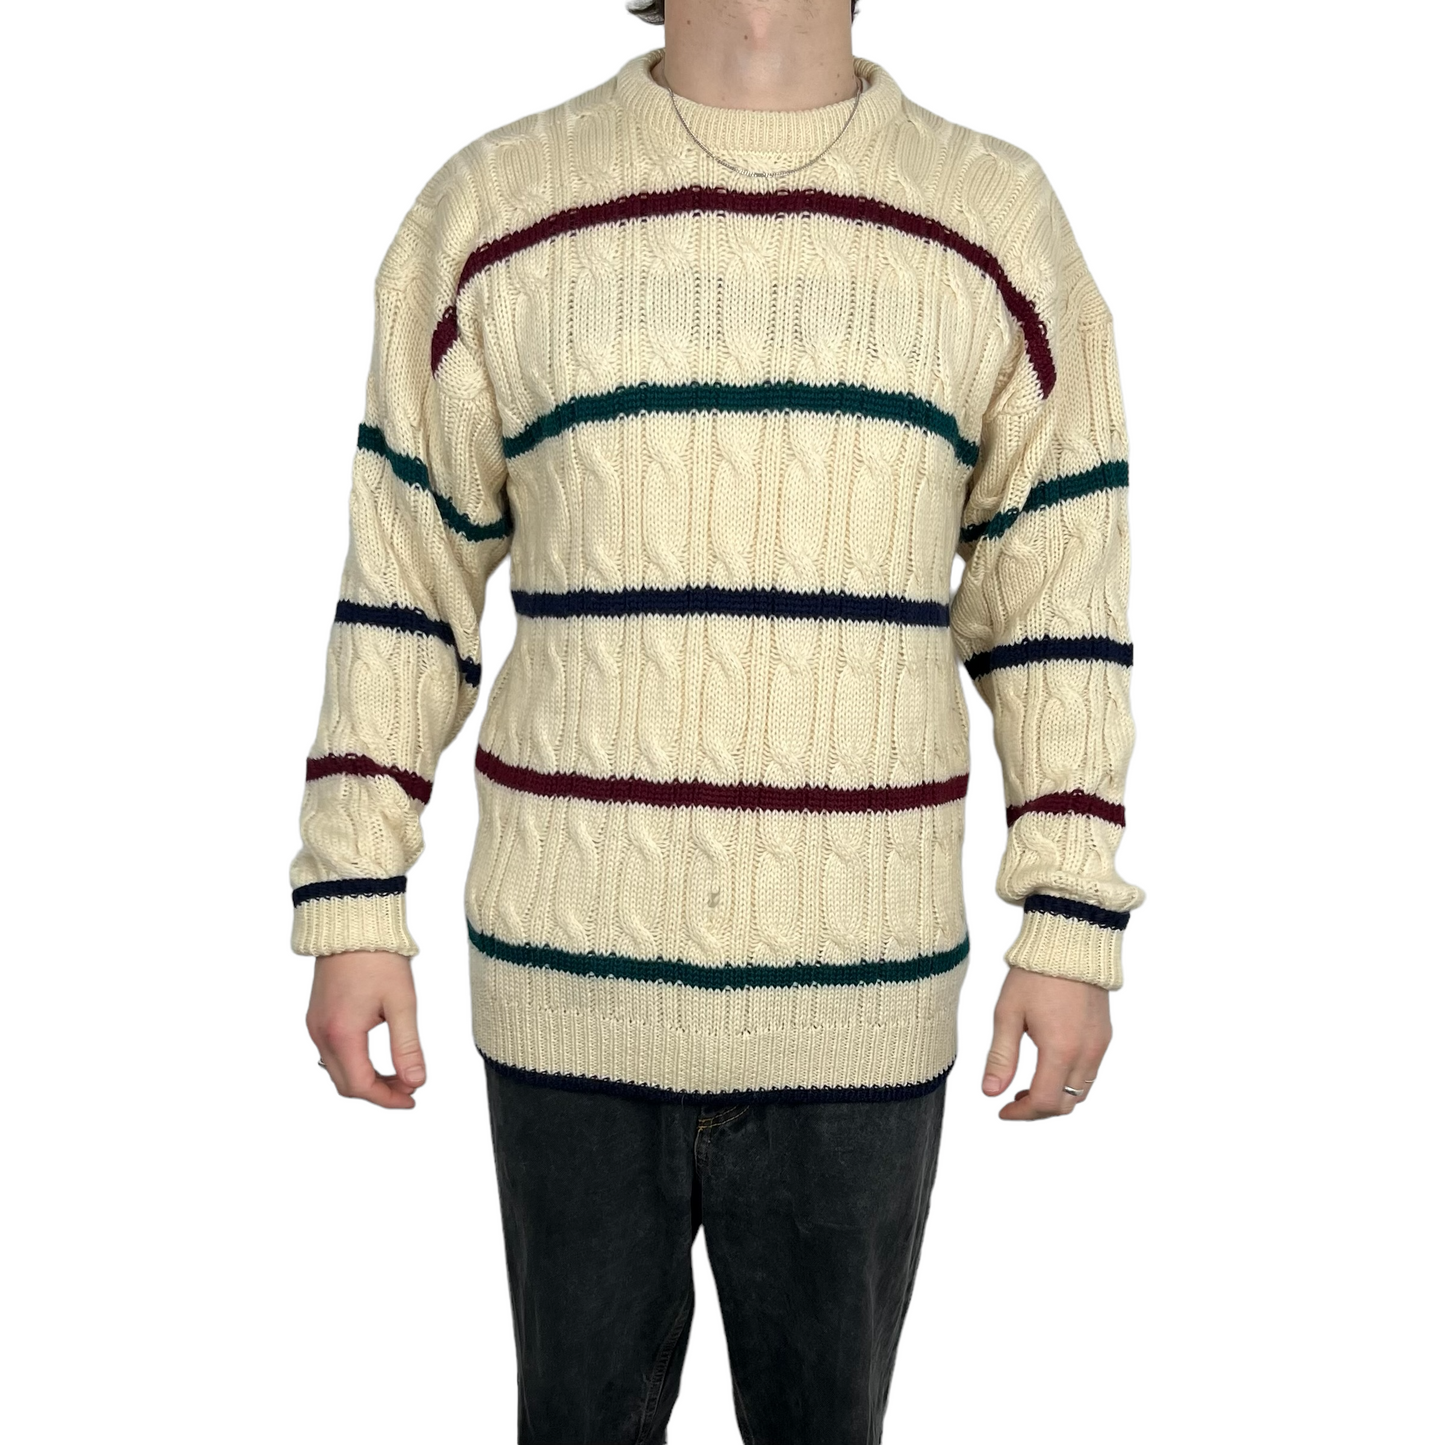 Vintage 80’s John Ashford Cable Knitted Jumper - XL